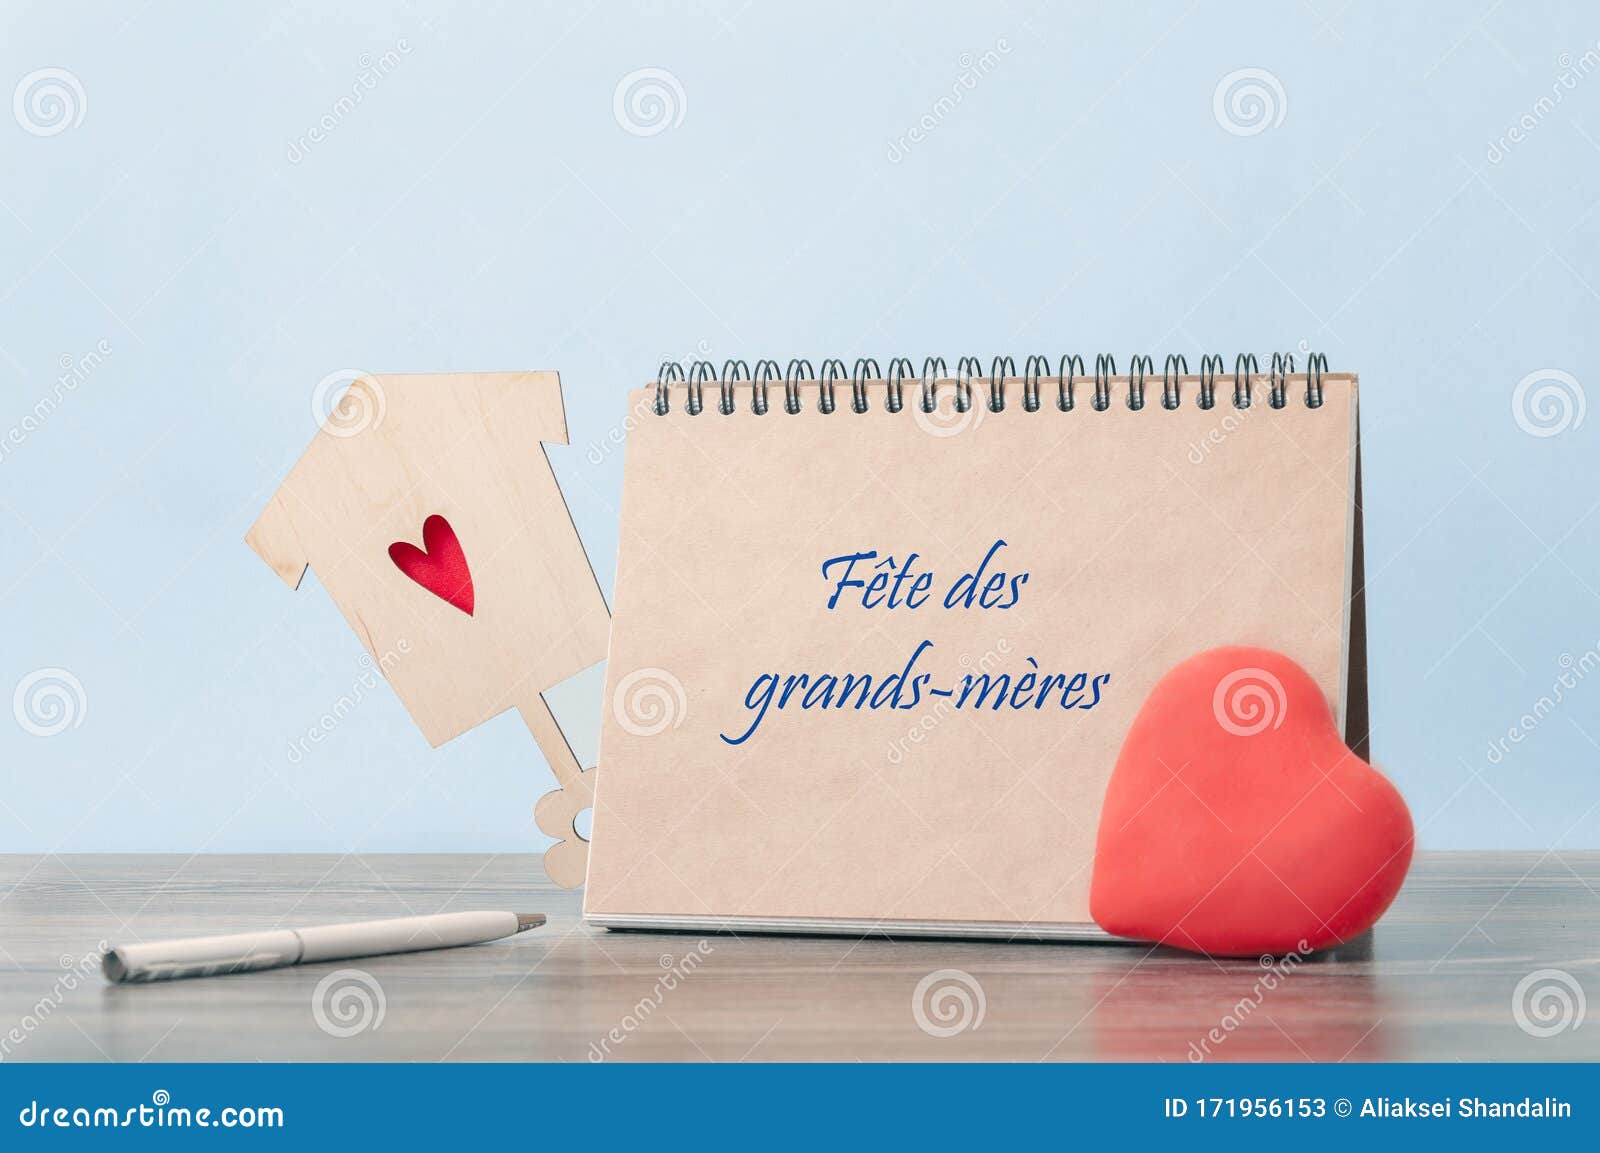 congratulations in french on the day of grandmothers.